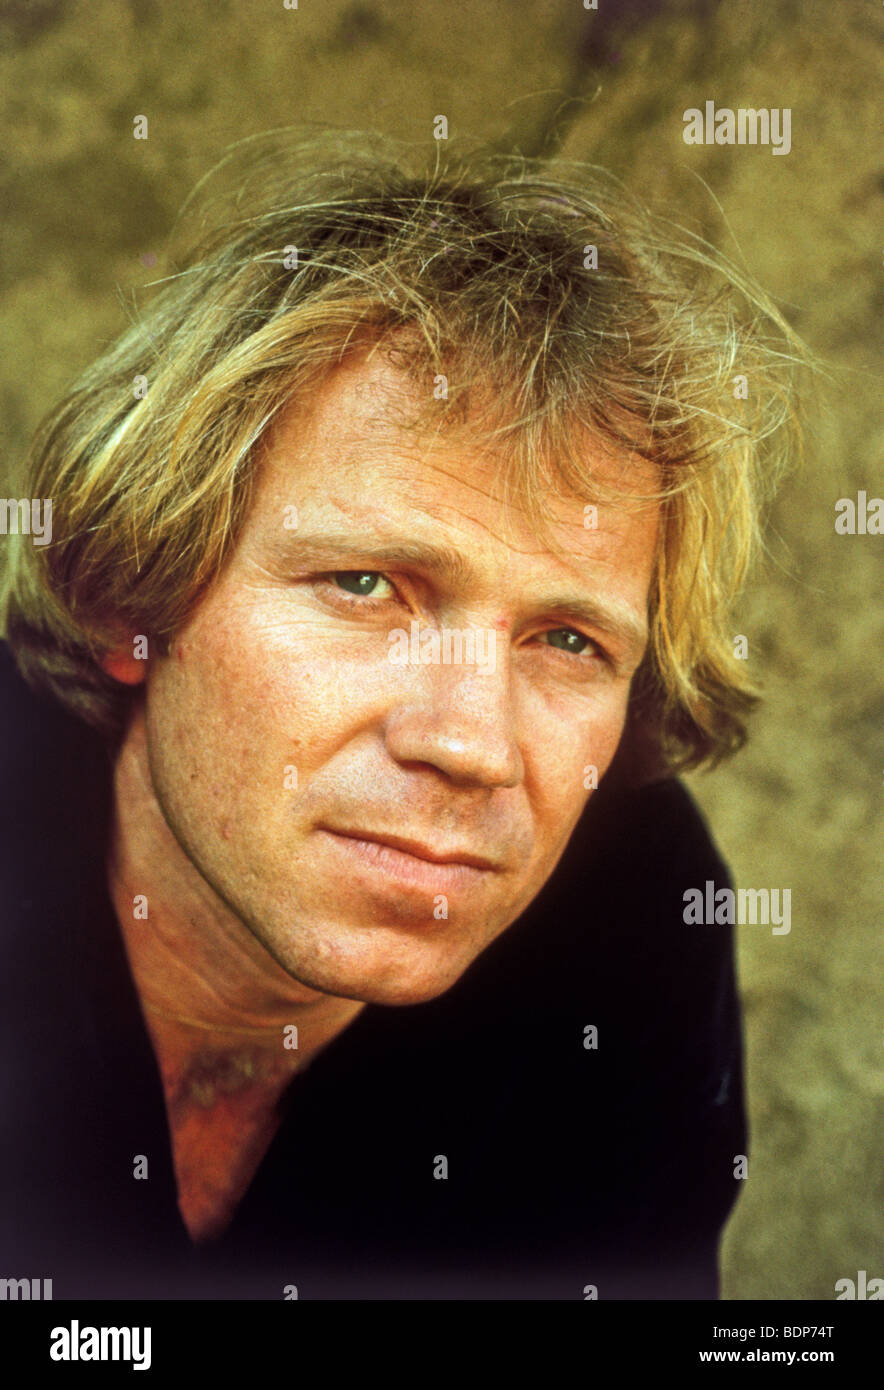 BARRY McGUIRE - US singer in 1965 when his Eve of Destruction topped the pop ...